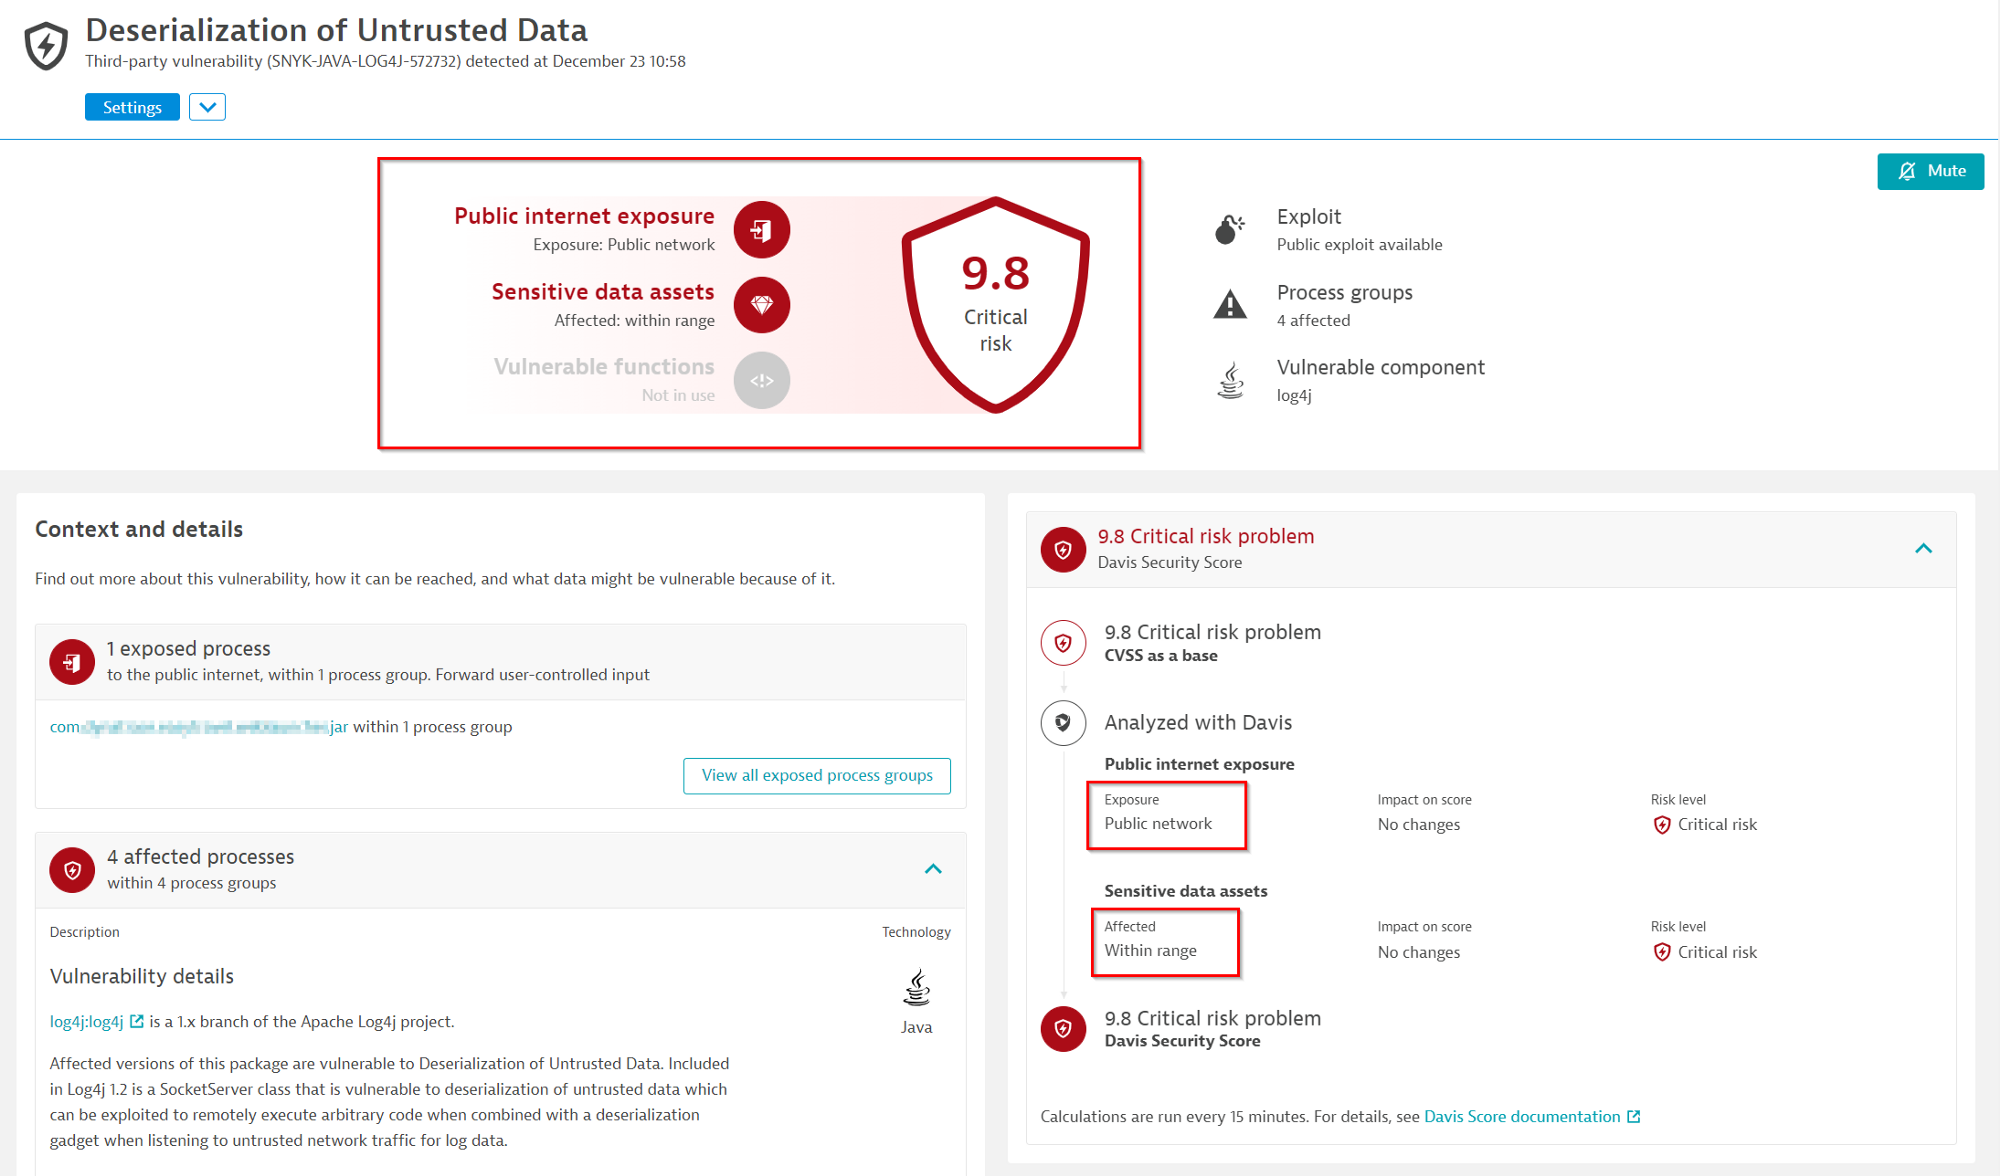 Scenario-4: Davis AI automatically has detected the exposure to Public network and sensitive data access within range marking the risk level to Critical and a DSS score to 9.8